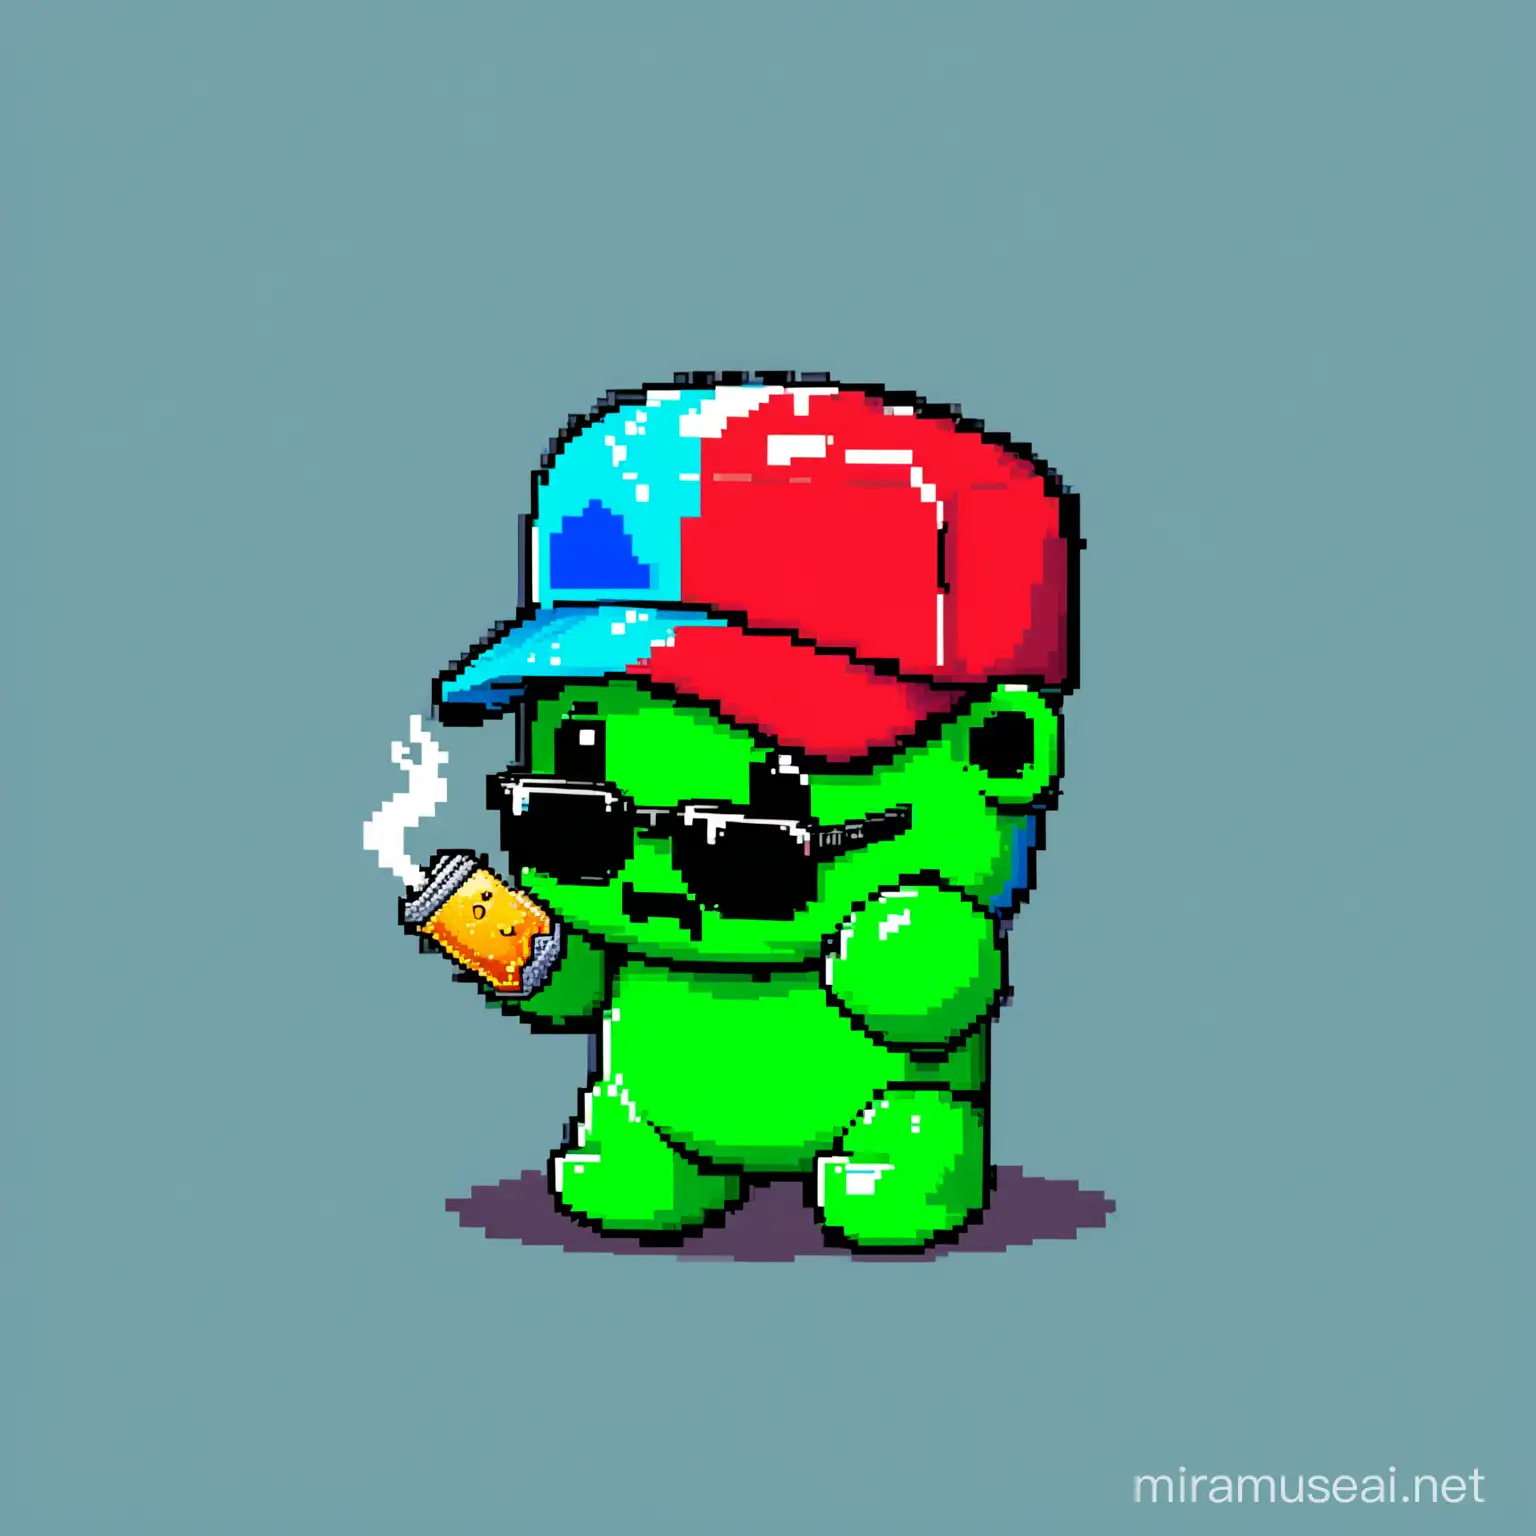 Funny and raandom colored 8 Bit solo gummy bear Mascot for Crypto Meme Token. Random accessories like cap or sunglasses or smoking joint